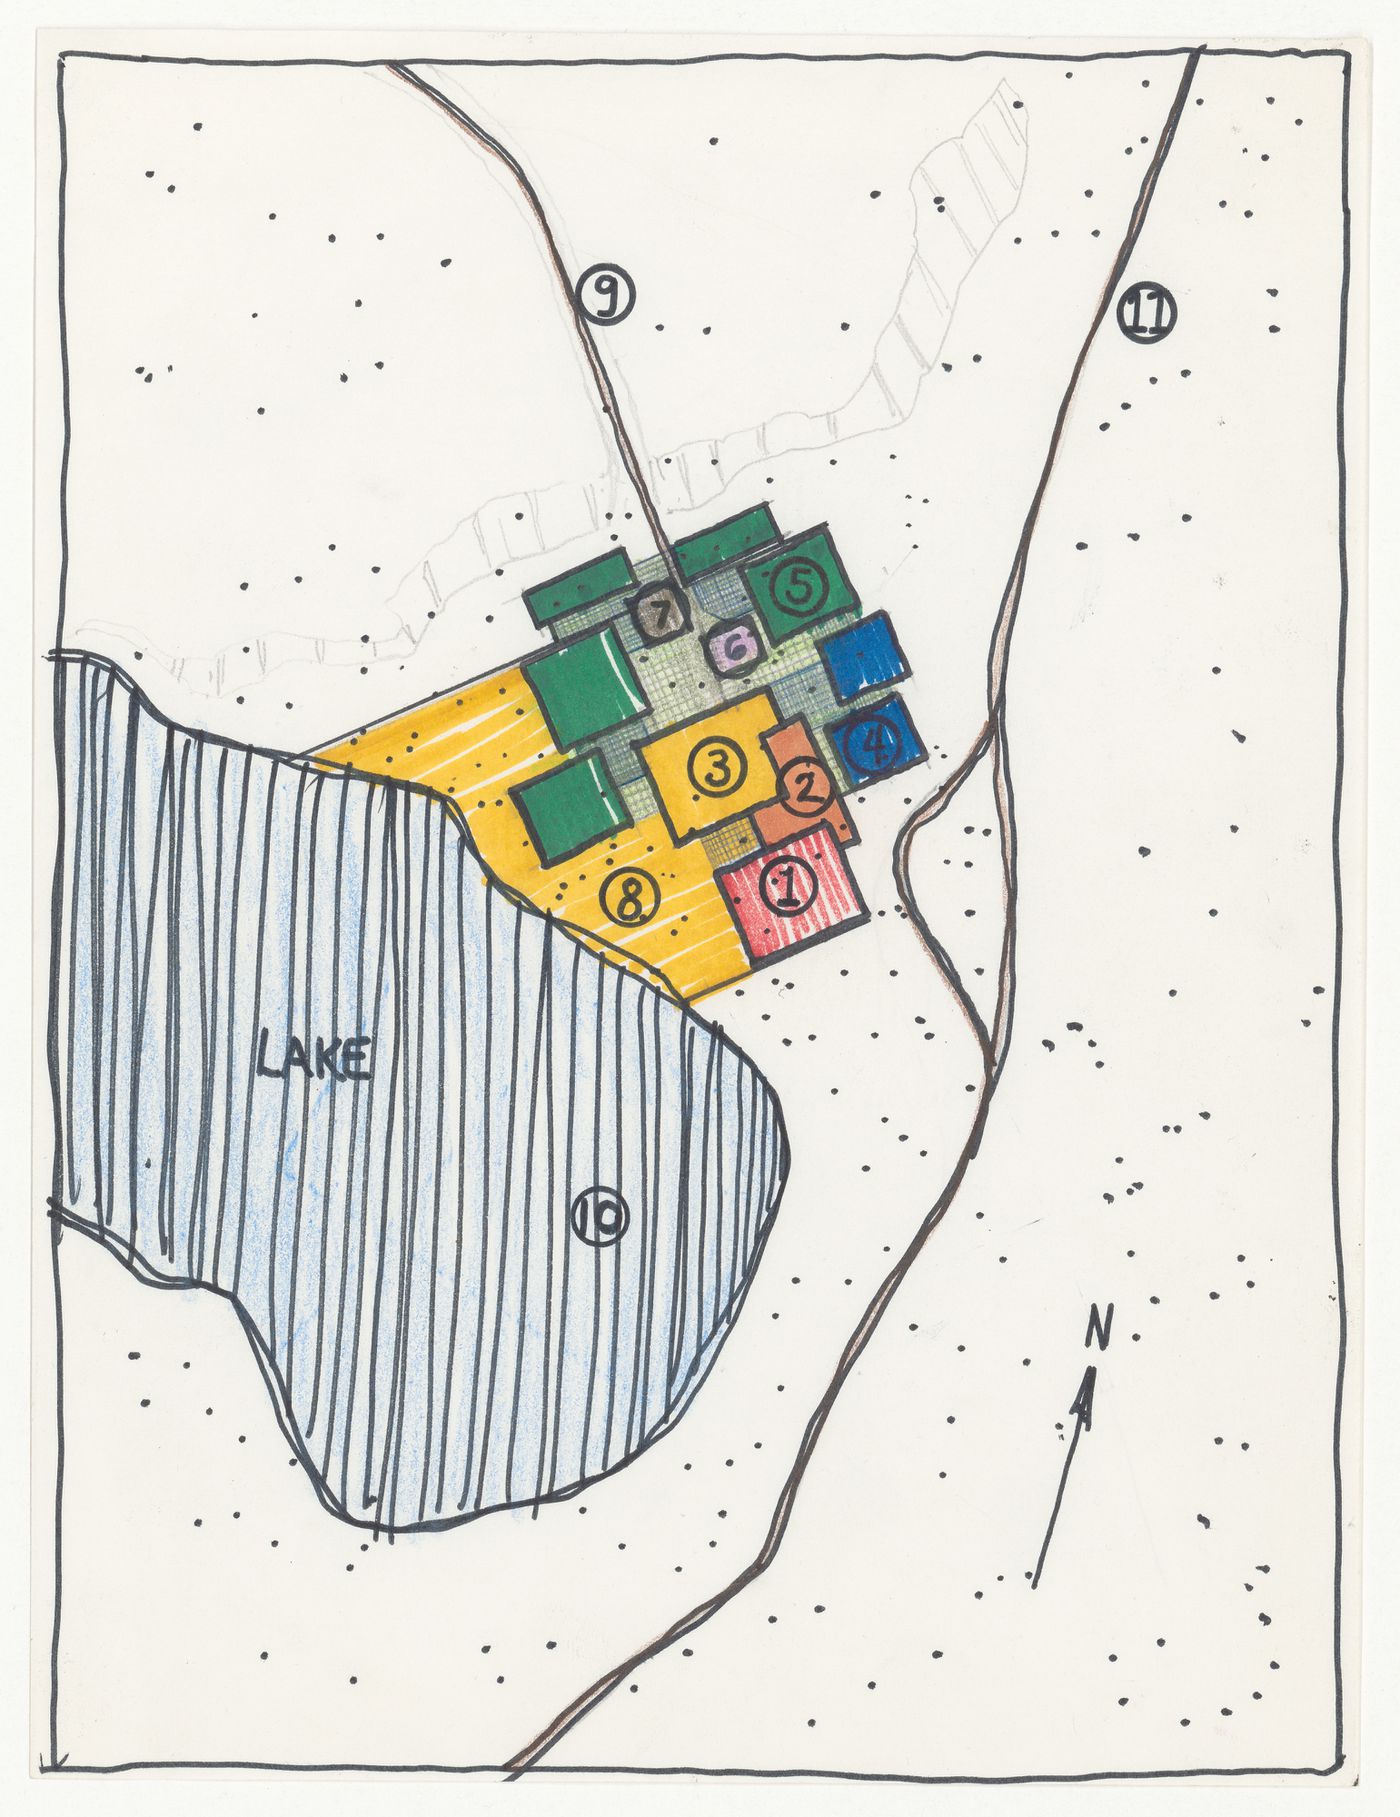 Sketch site plan for Northern Airlift